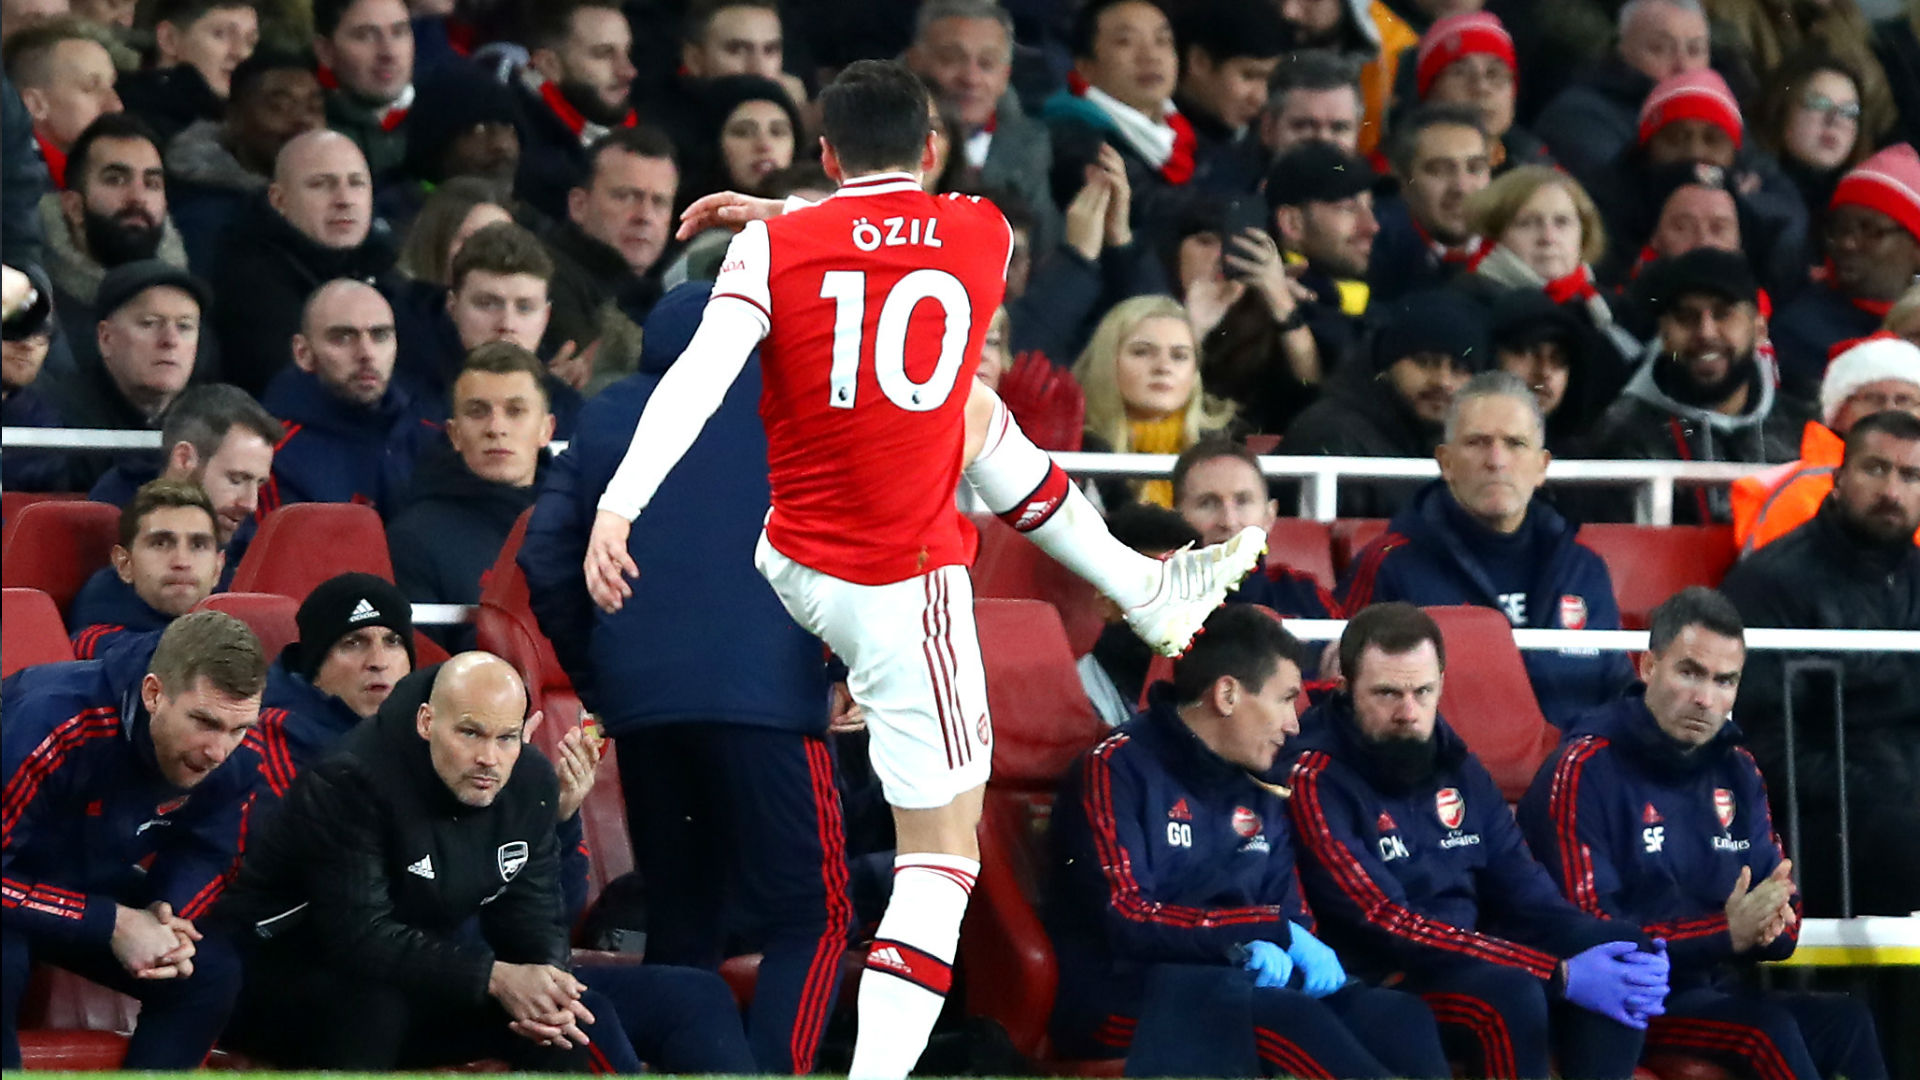 'We will deal with that later' - Ljungberg responds after Ozil his hauled off to a chorus of jeers